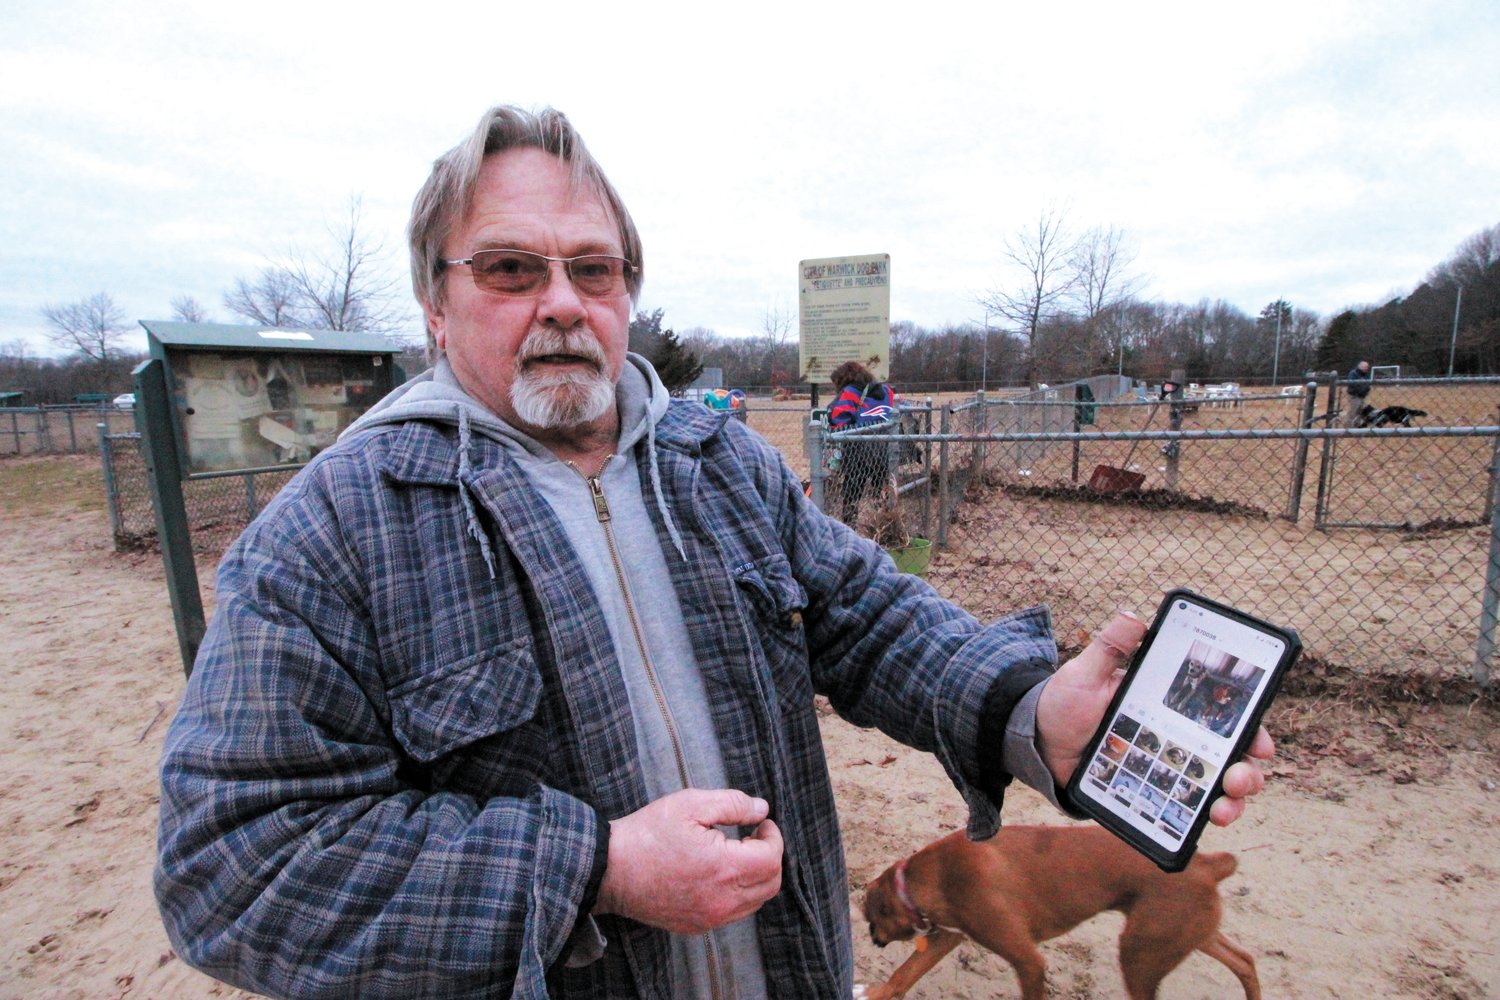 FAMILY ALBUM: Chip Hinkson, who is considered one of the dog park’s veterans, shows off photos of his two dogs, Nova and Dottie.